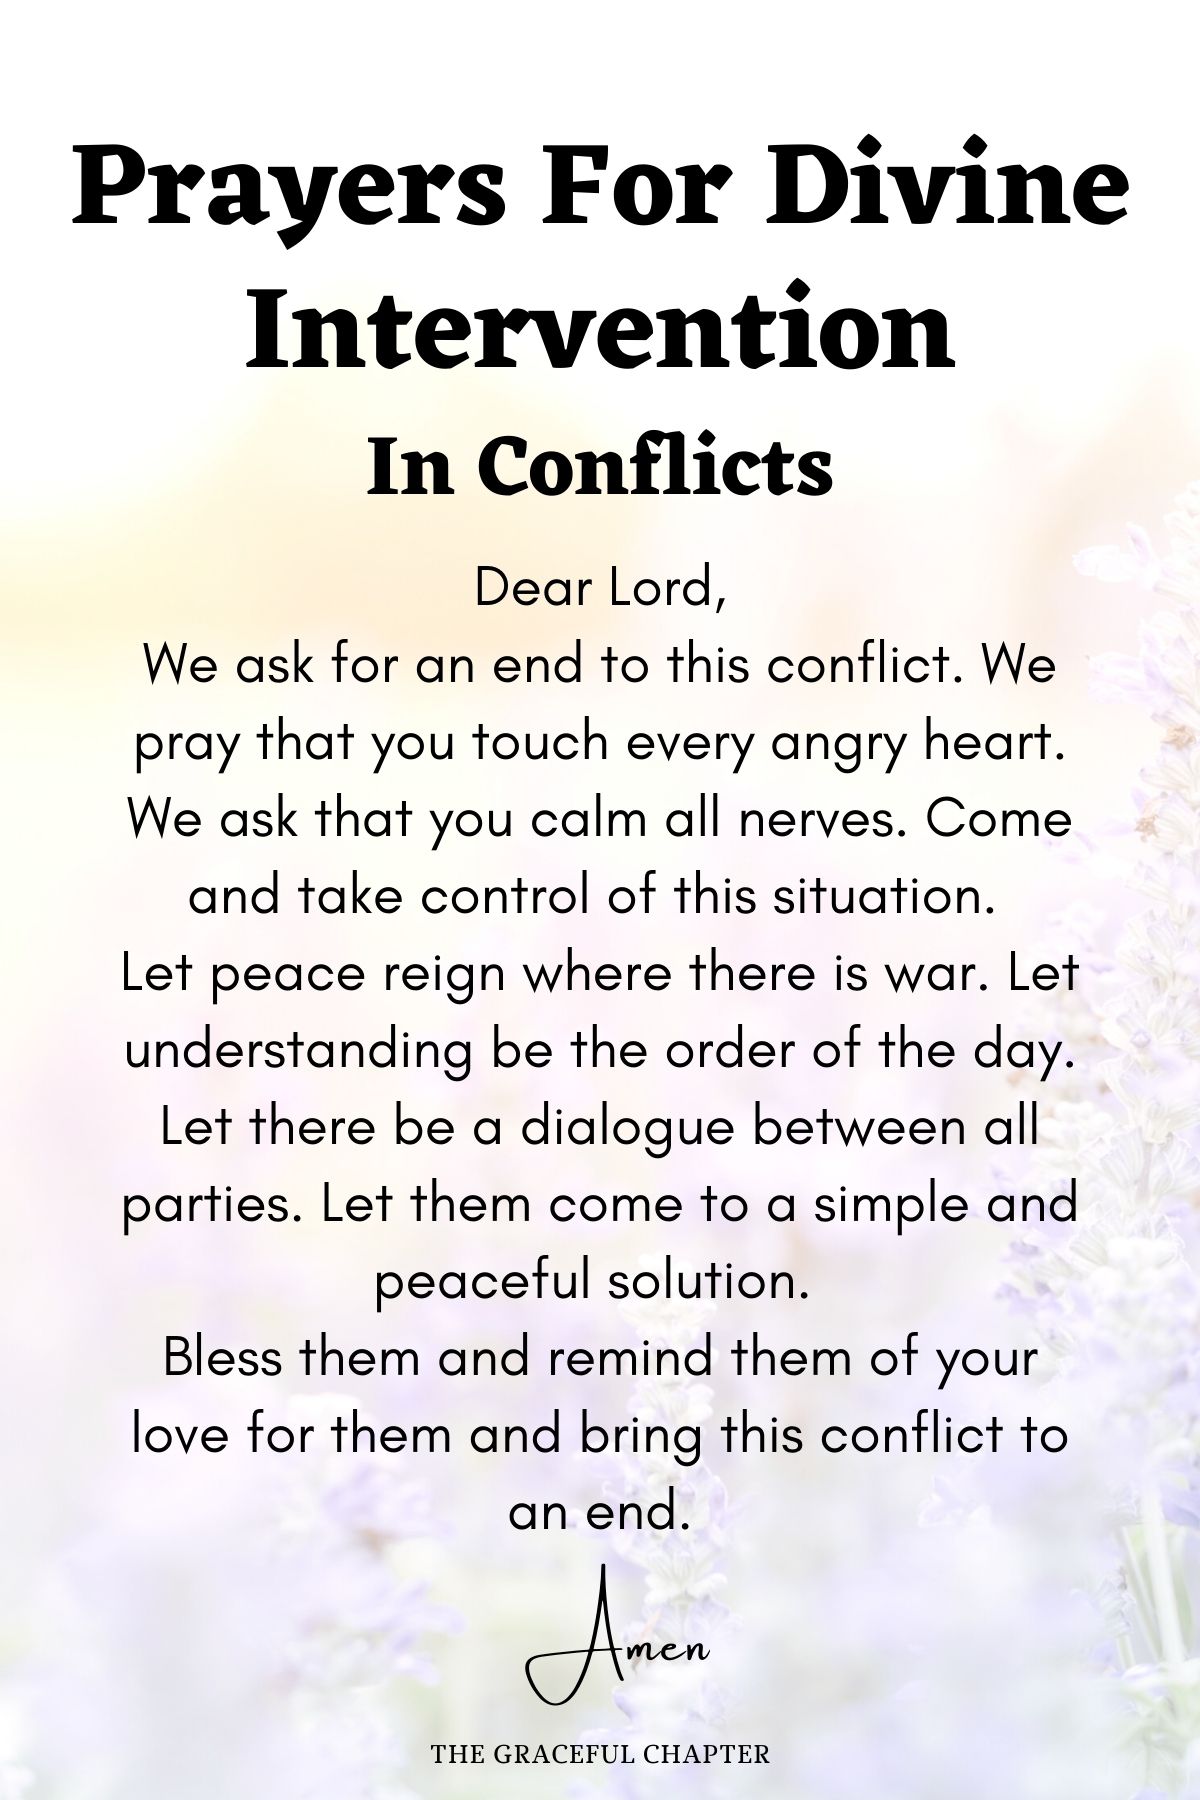 Prayers for divine intervention In conflicts